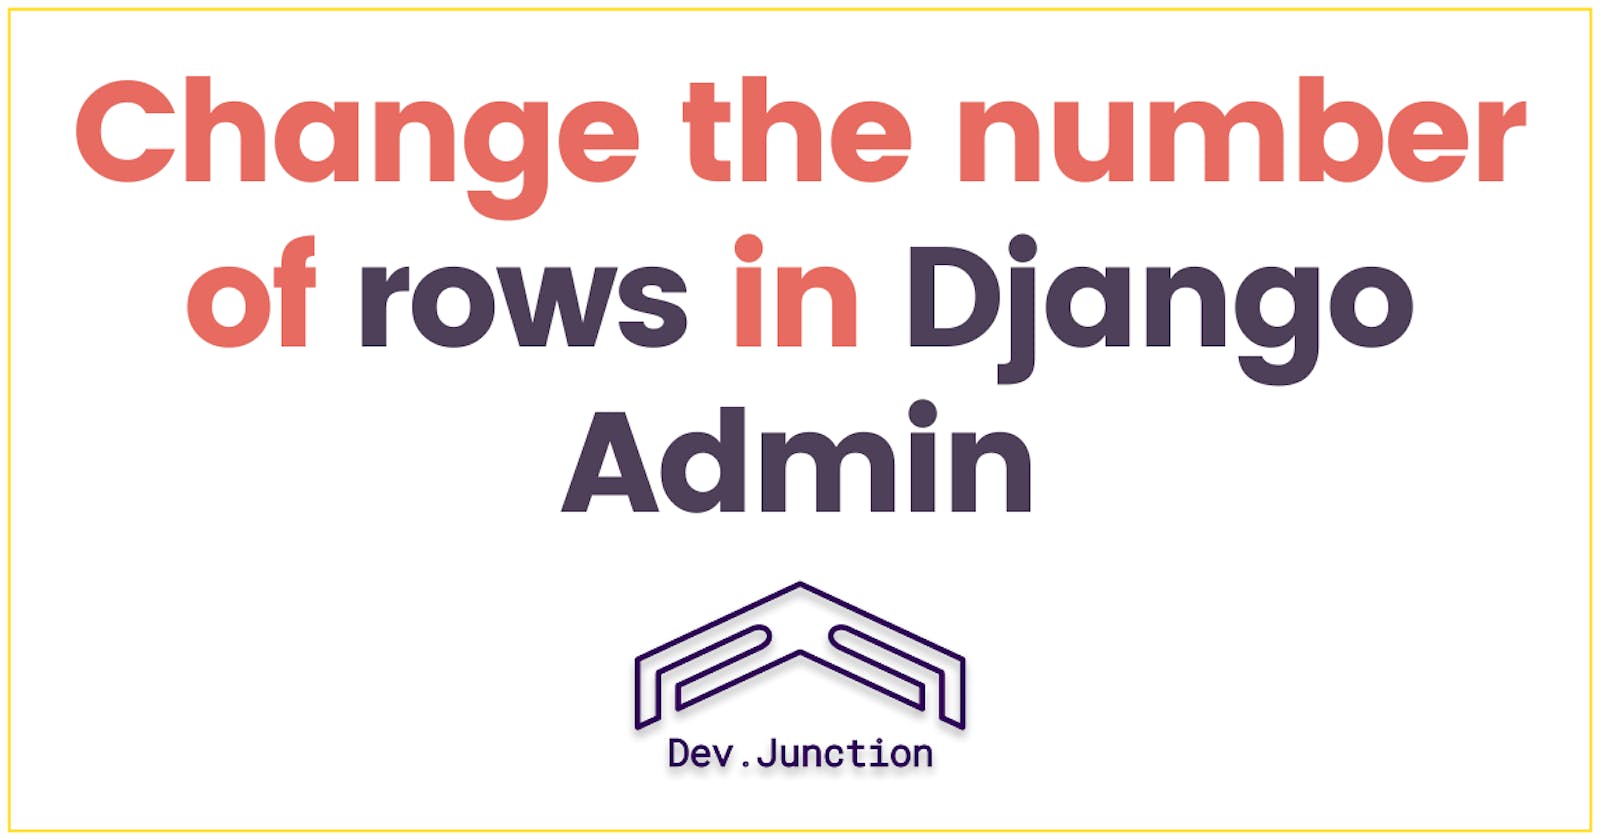 How to change the number of objects (rows) to show in the Django admin change list view?